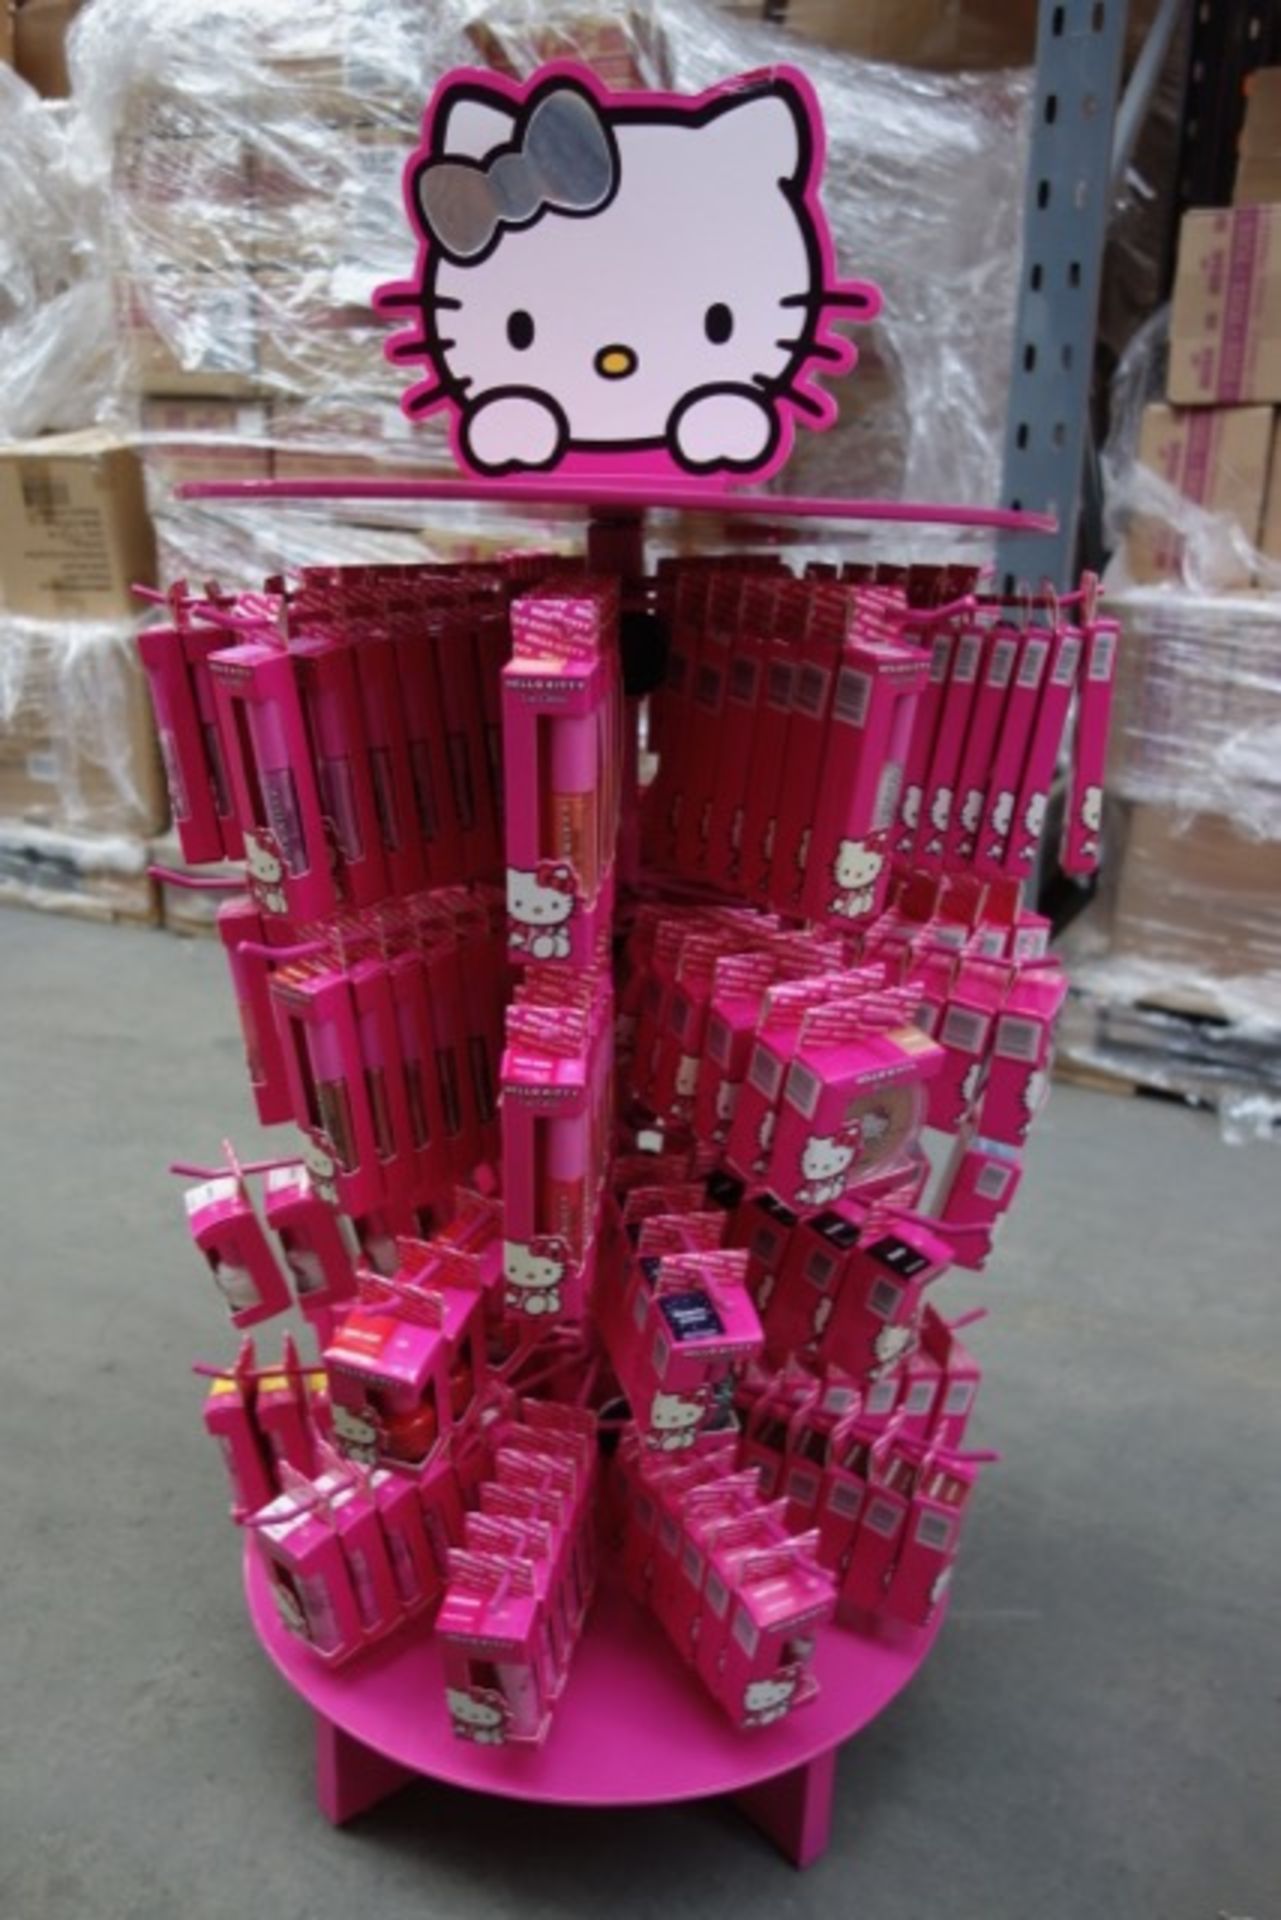 Display Stand Containing Approx. 240 Pieces of Hello Kitty Cosmetics - each with a RRP of £3.50 - Bild 2 aus 9